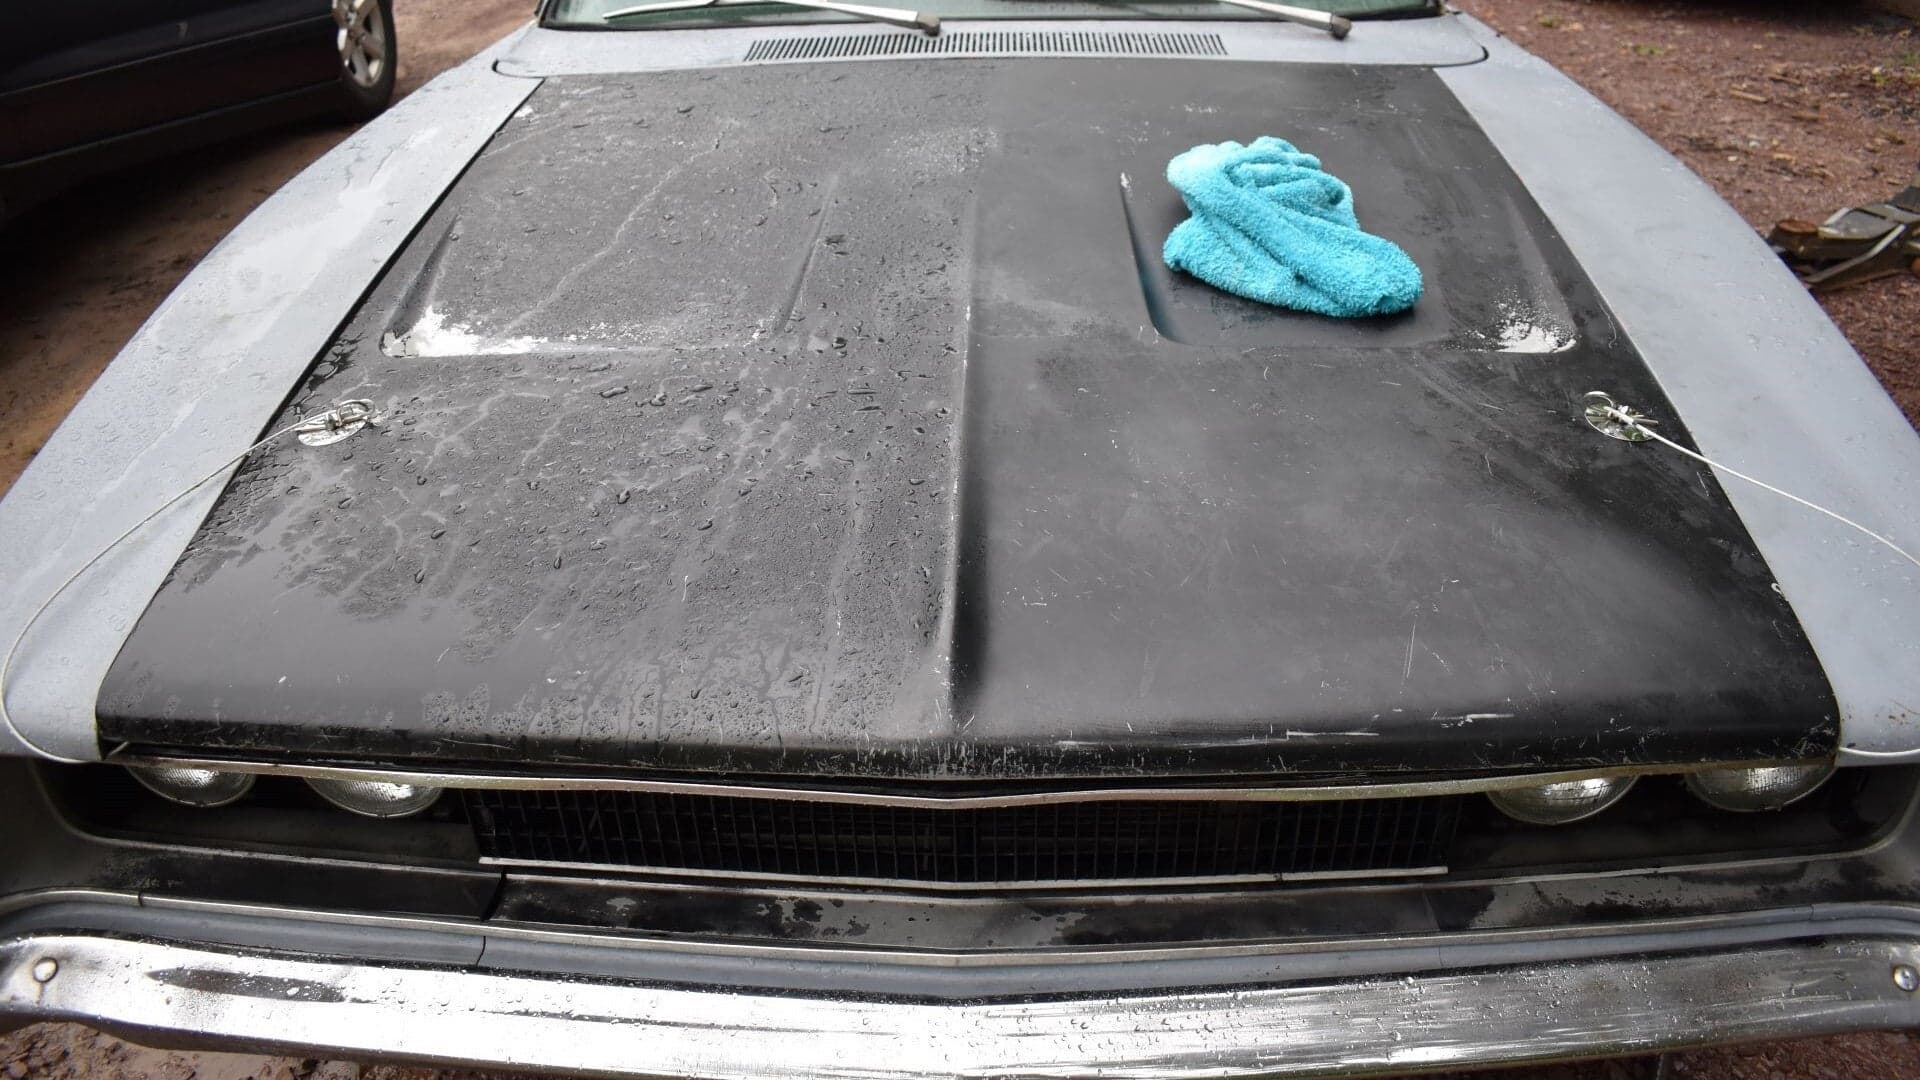 How To Dry Your Car the Right Way